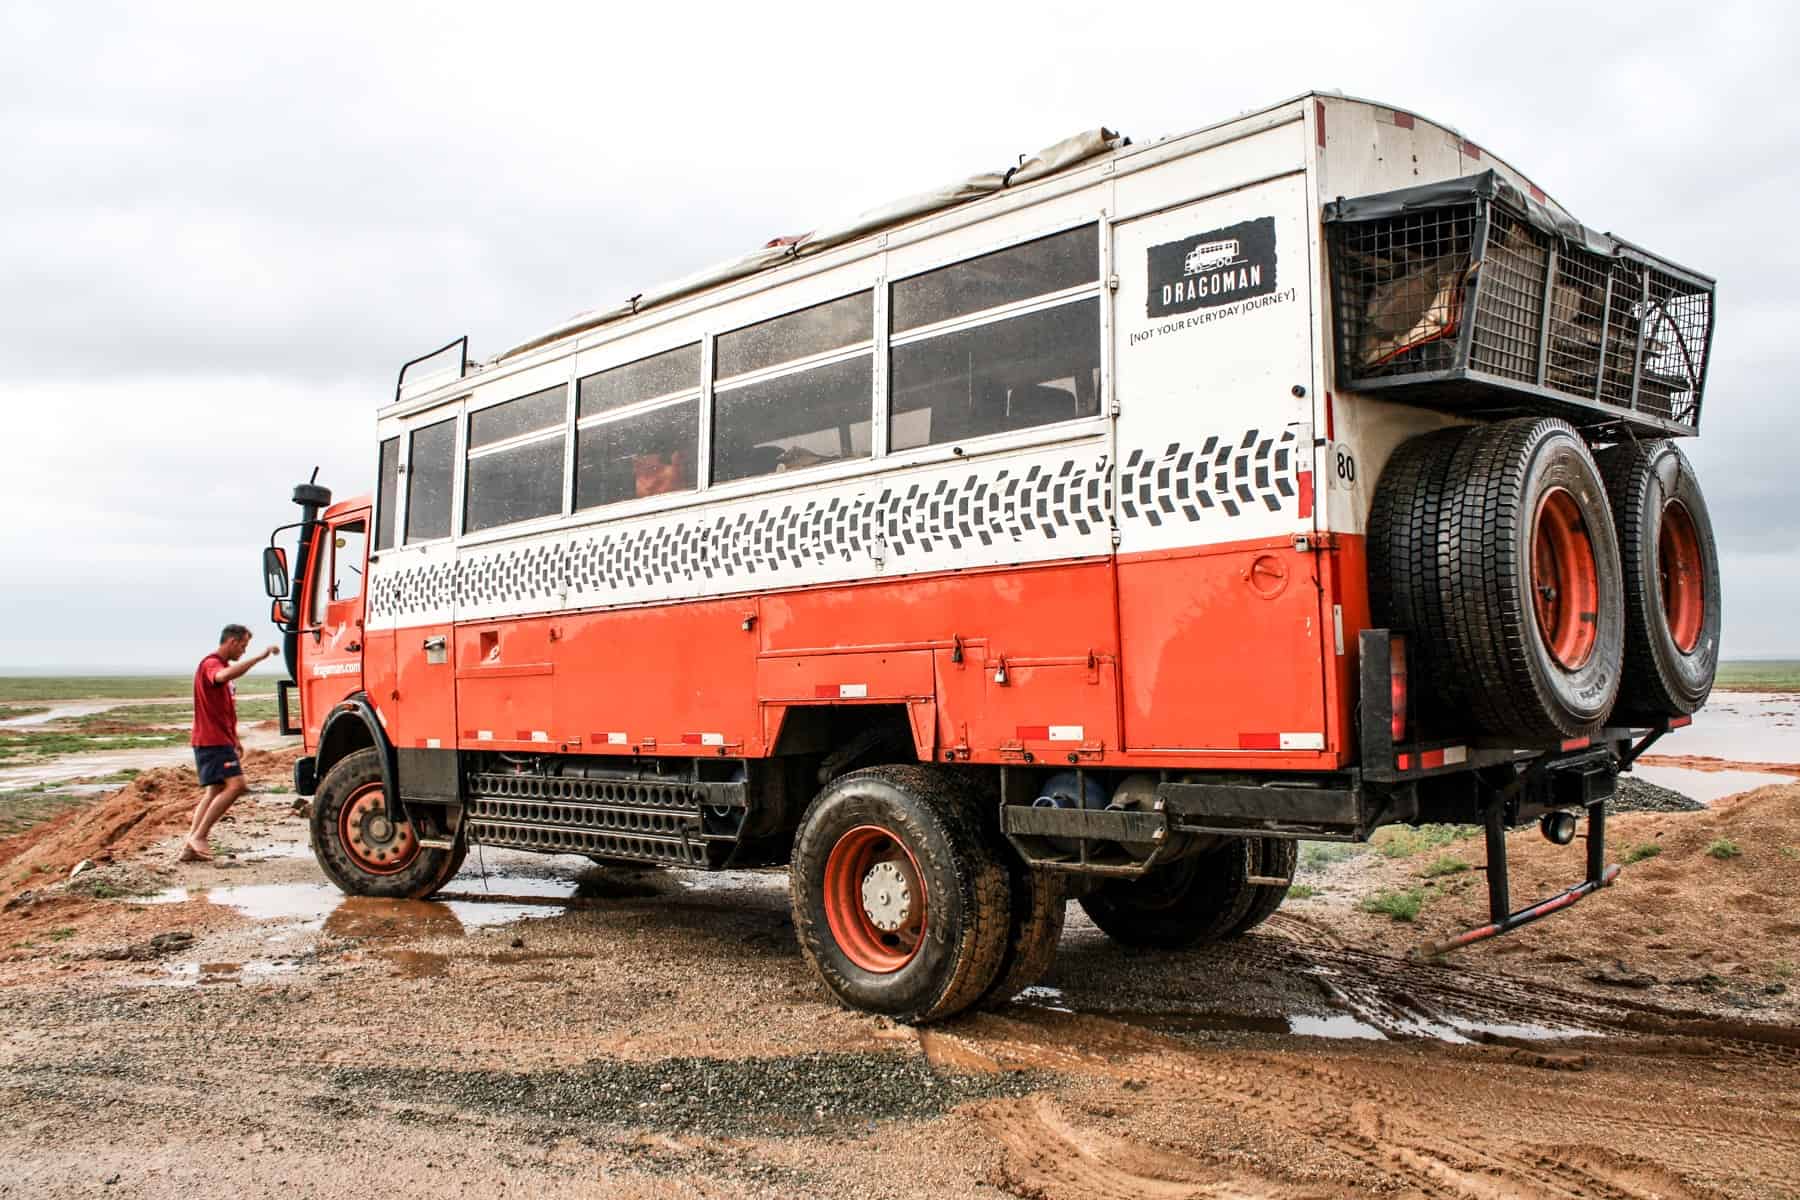 The orange and white overlanding truck used to travel to Mongolia and its rural landscape like the muddy one shown